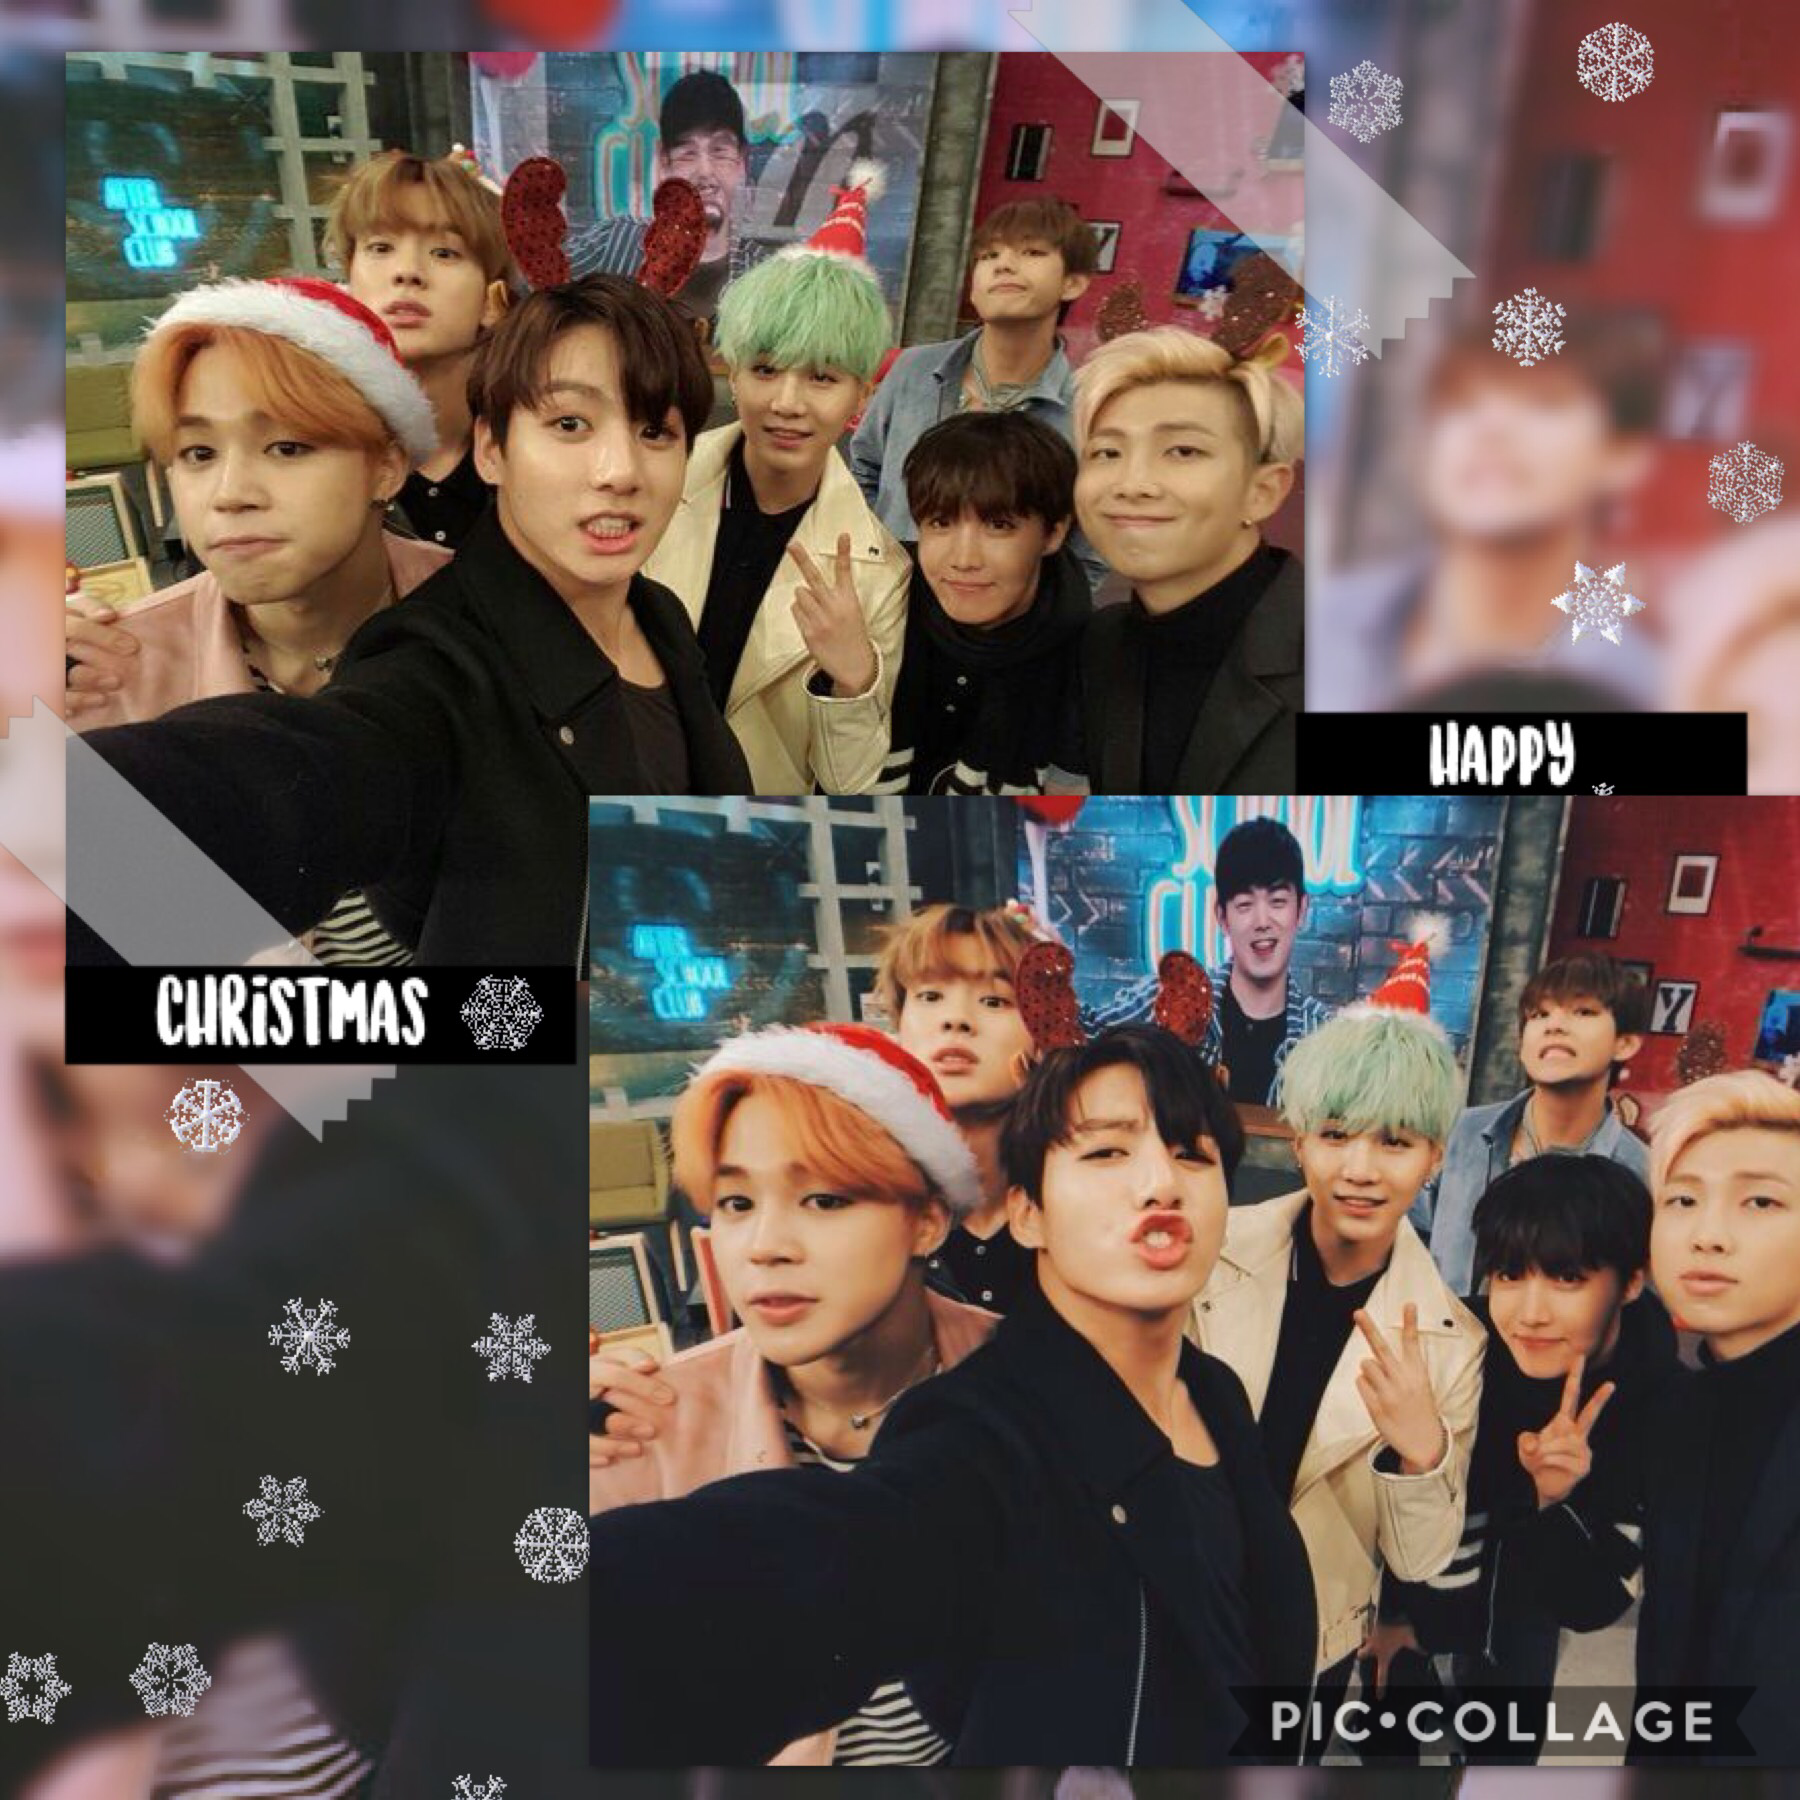 🌟tap🌟

happy christmas everyone!! hope you all have an amazing day and comment what you got! kookie looks so cute in these photos i can’t even. 
q// fav. christmas song?
a// crystal snow and fairytale of new york 